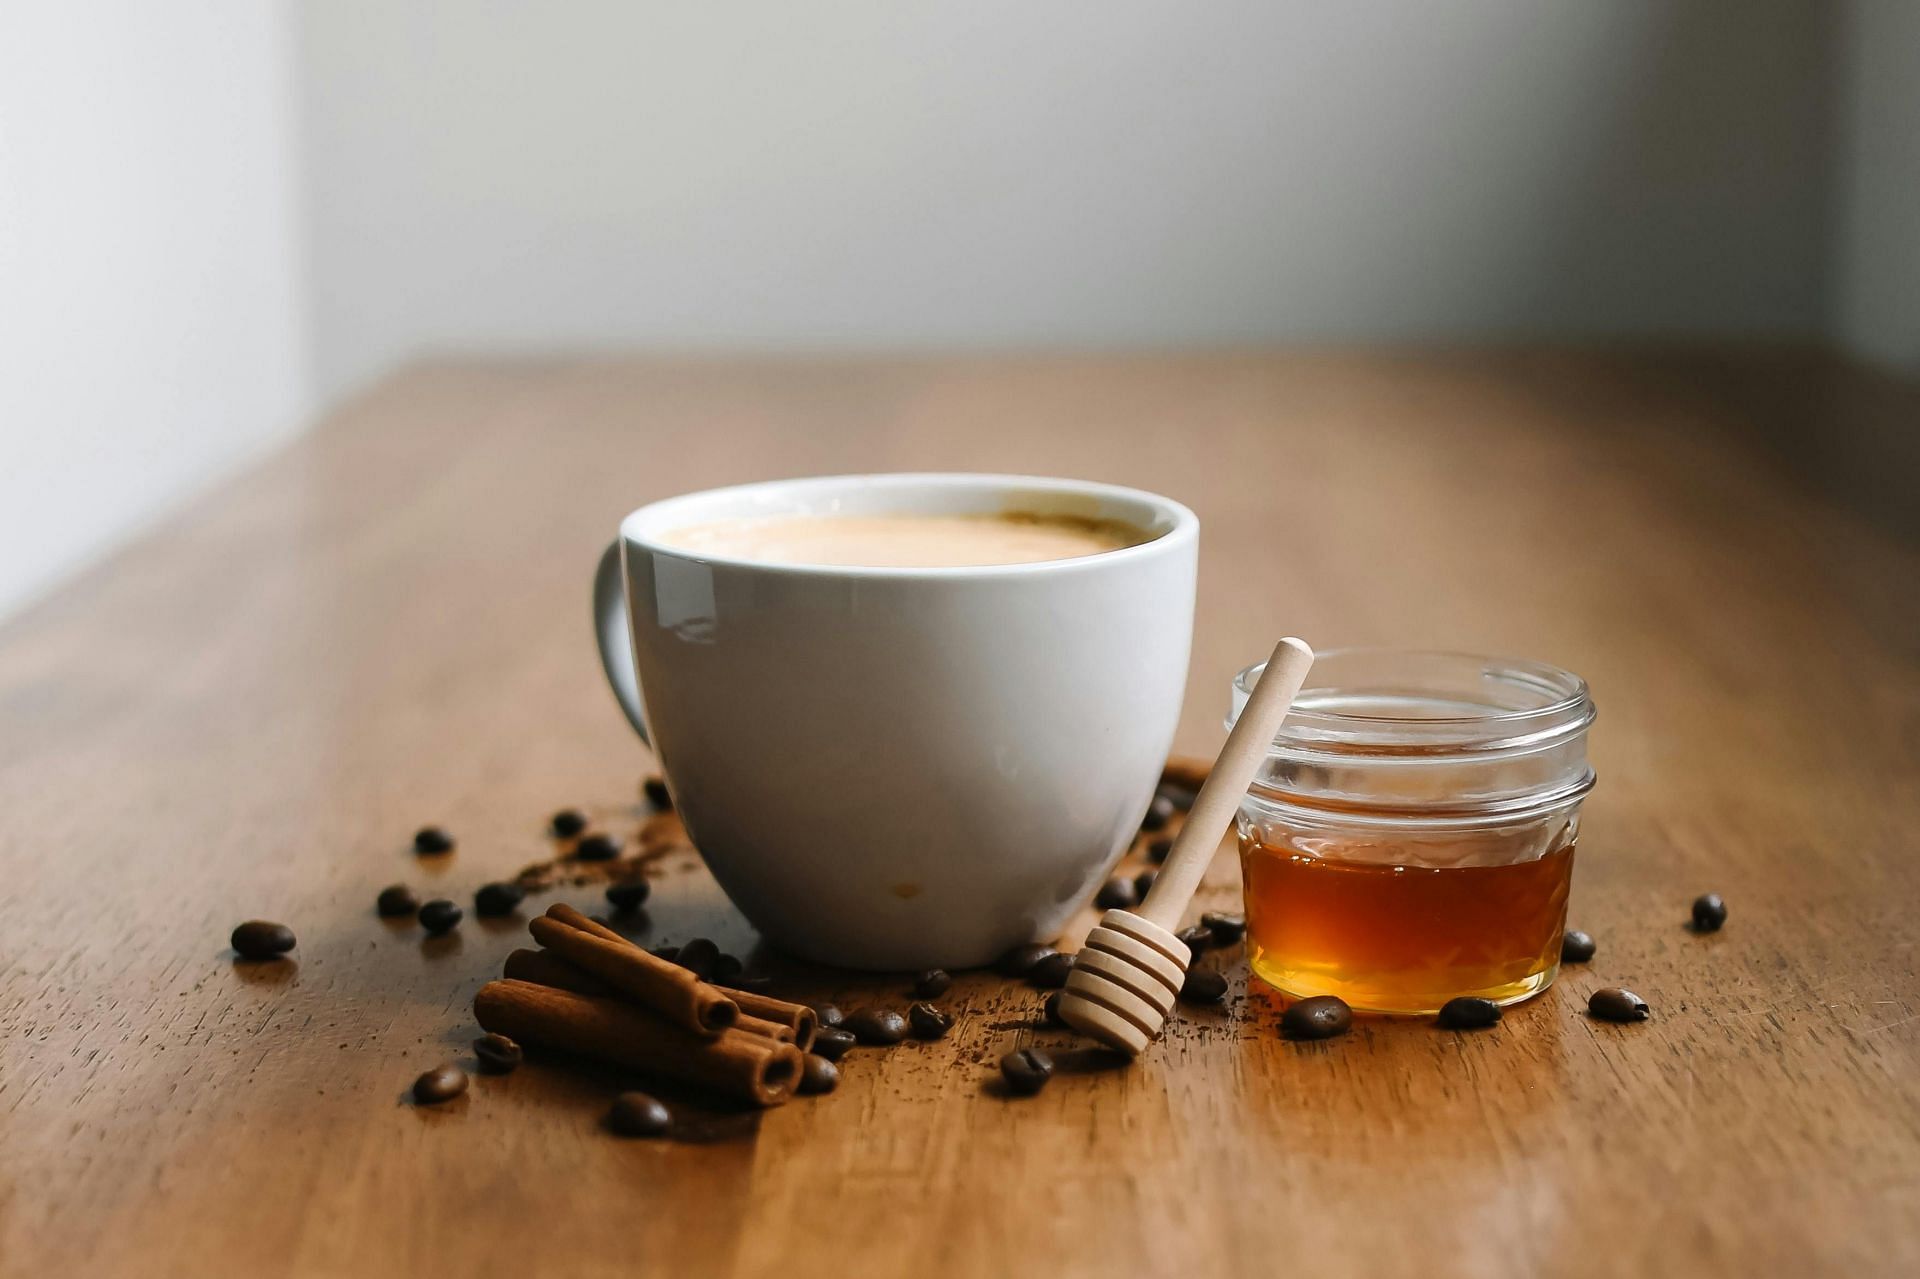 Ashwagandha one of the stress relief teas (image sourced via Pexels / Photo by Julissa)